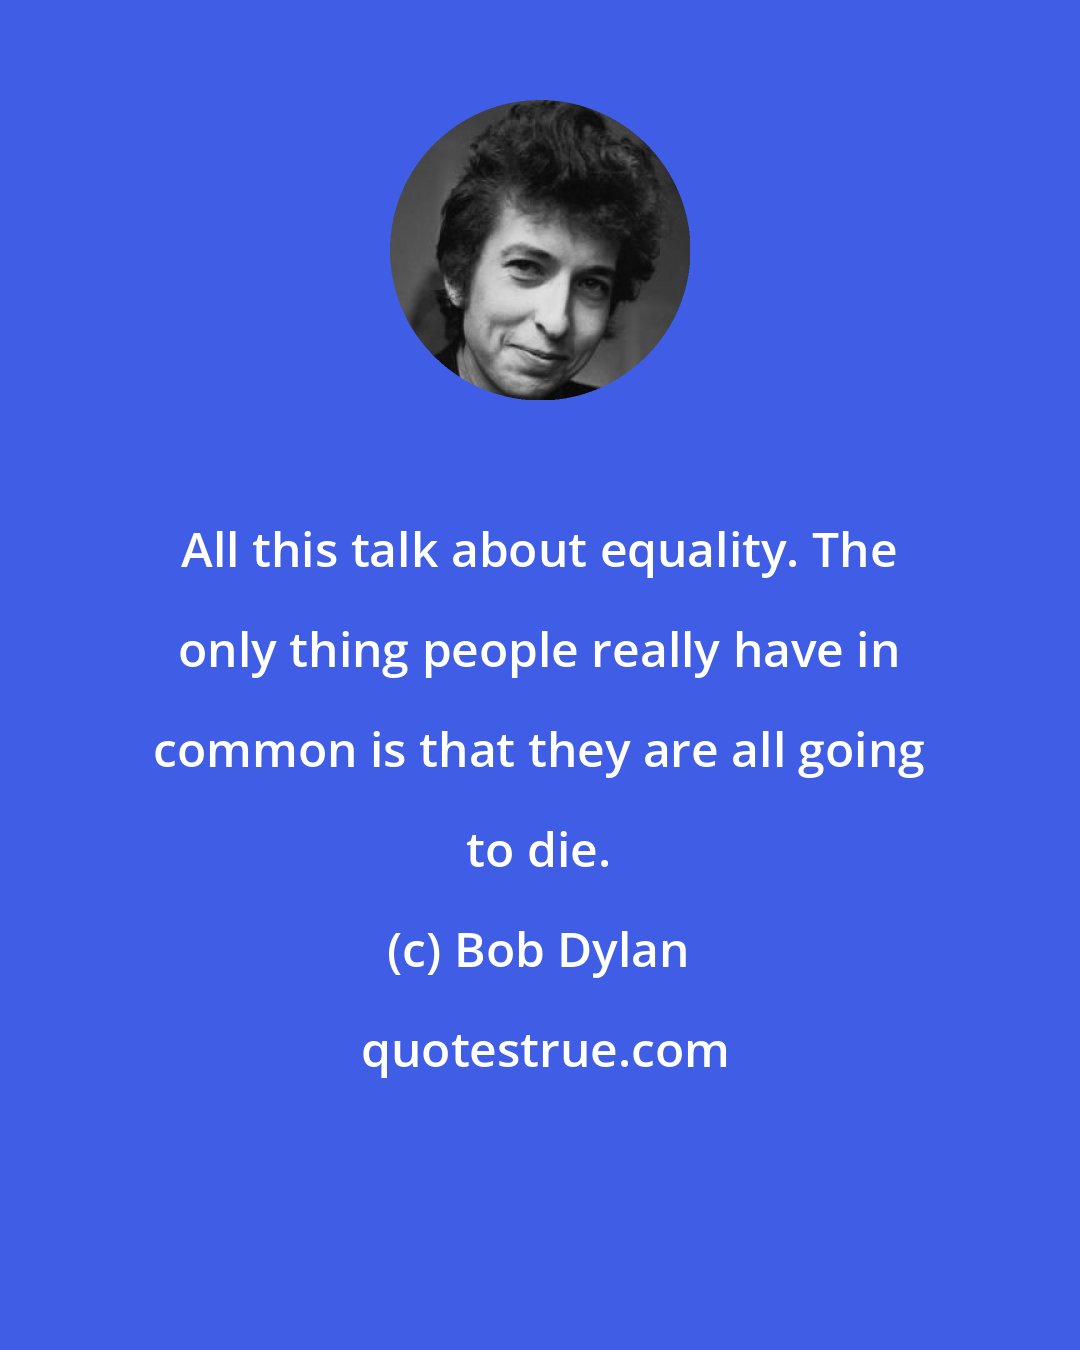 Bob Dylan: All this talk about equality. The only thing people really have in common is that they are all going to die.